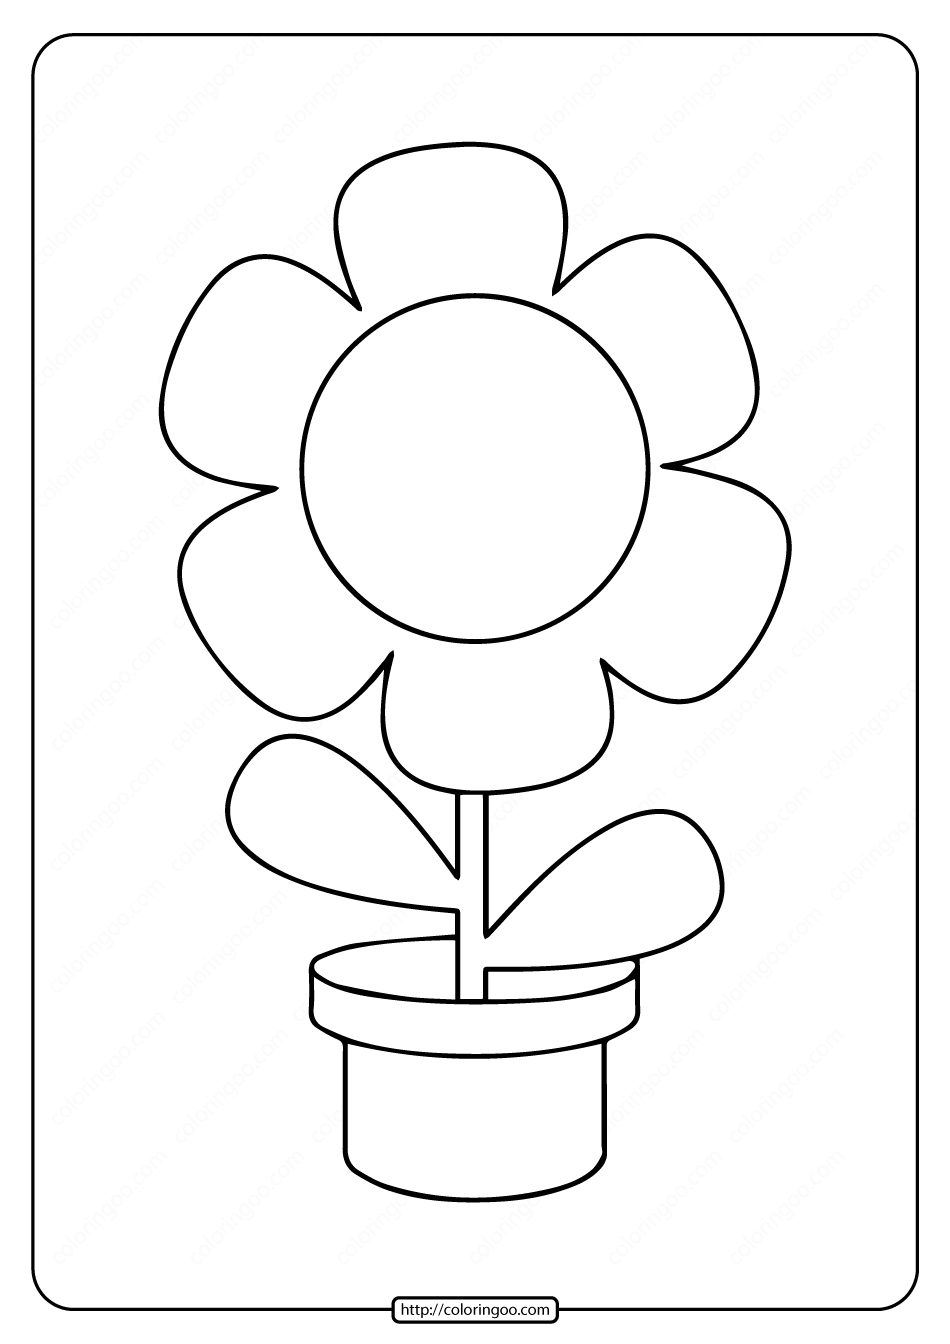 Printable Simple Flower in a Pot Coloring Page